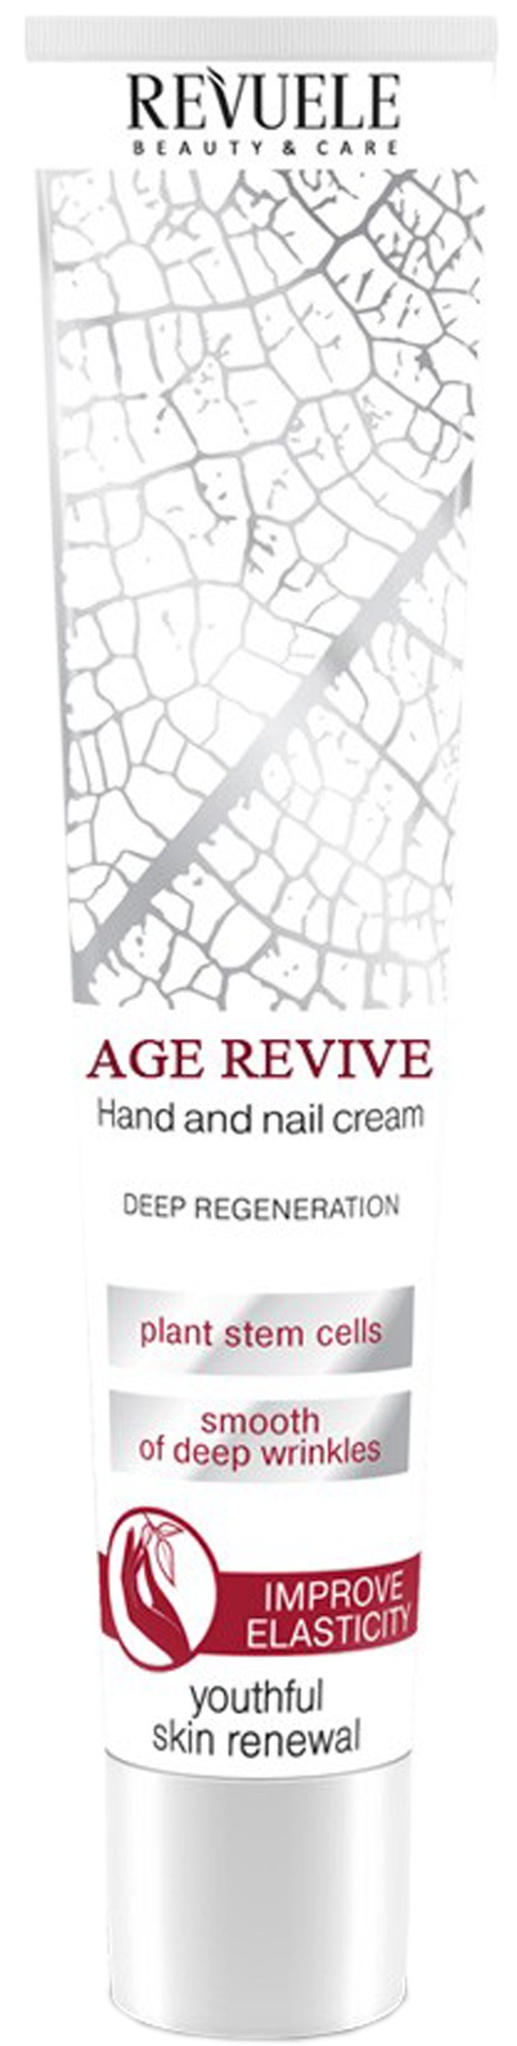 Revuele Age Revive Hand  And Nail Cream